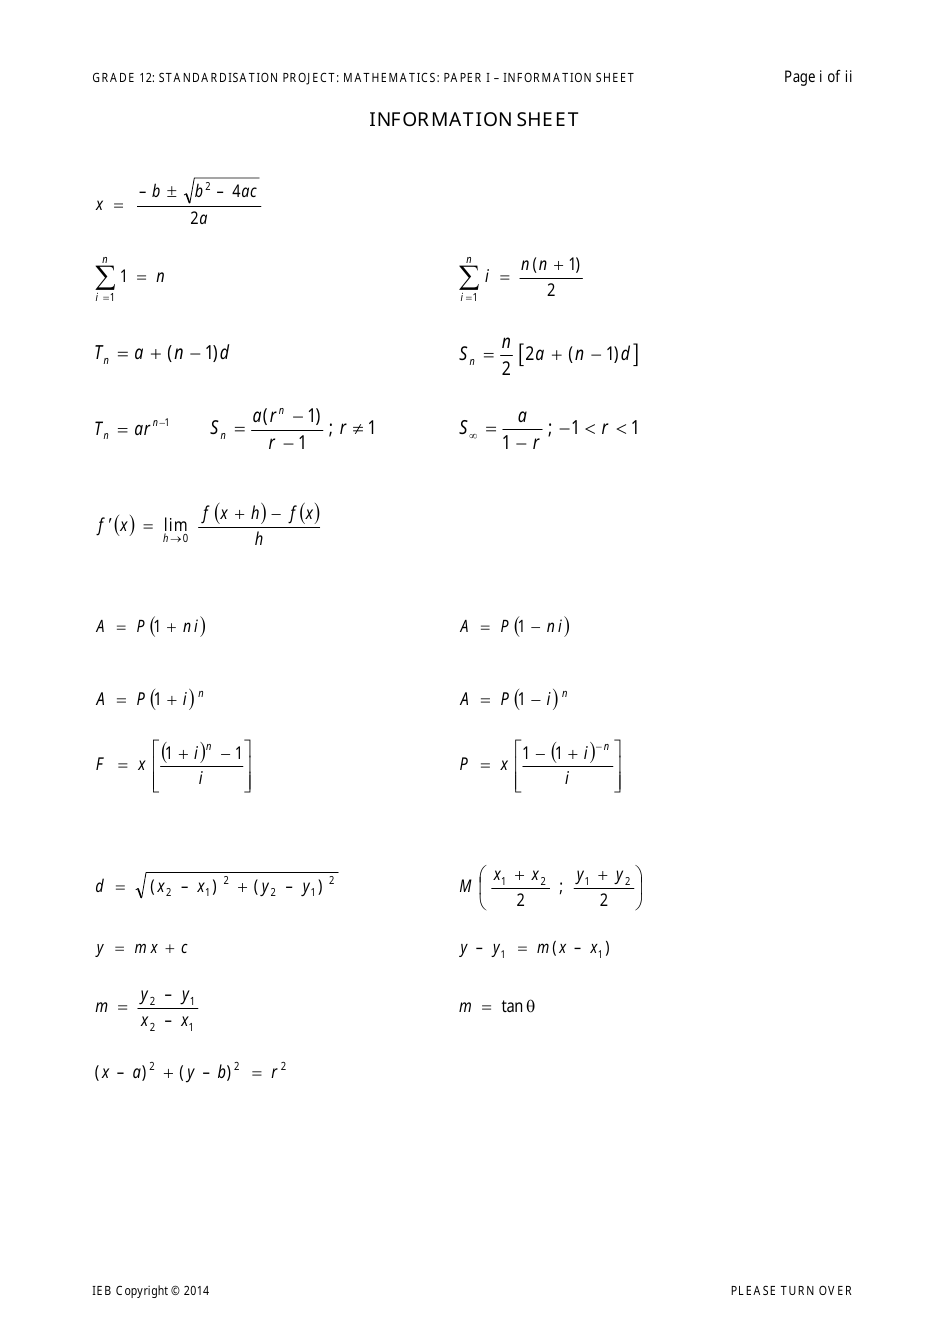 Grade 12 Mathematics Cheat Sheet - A comprehensive guide for Grade 12 students covering various mathematical concepts and formulas.